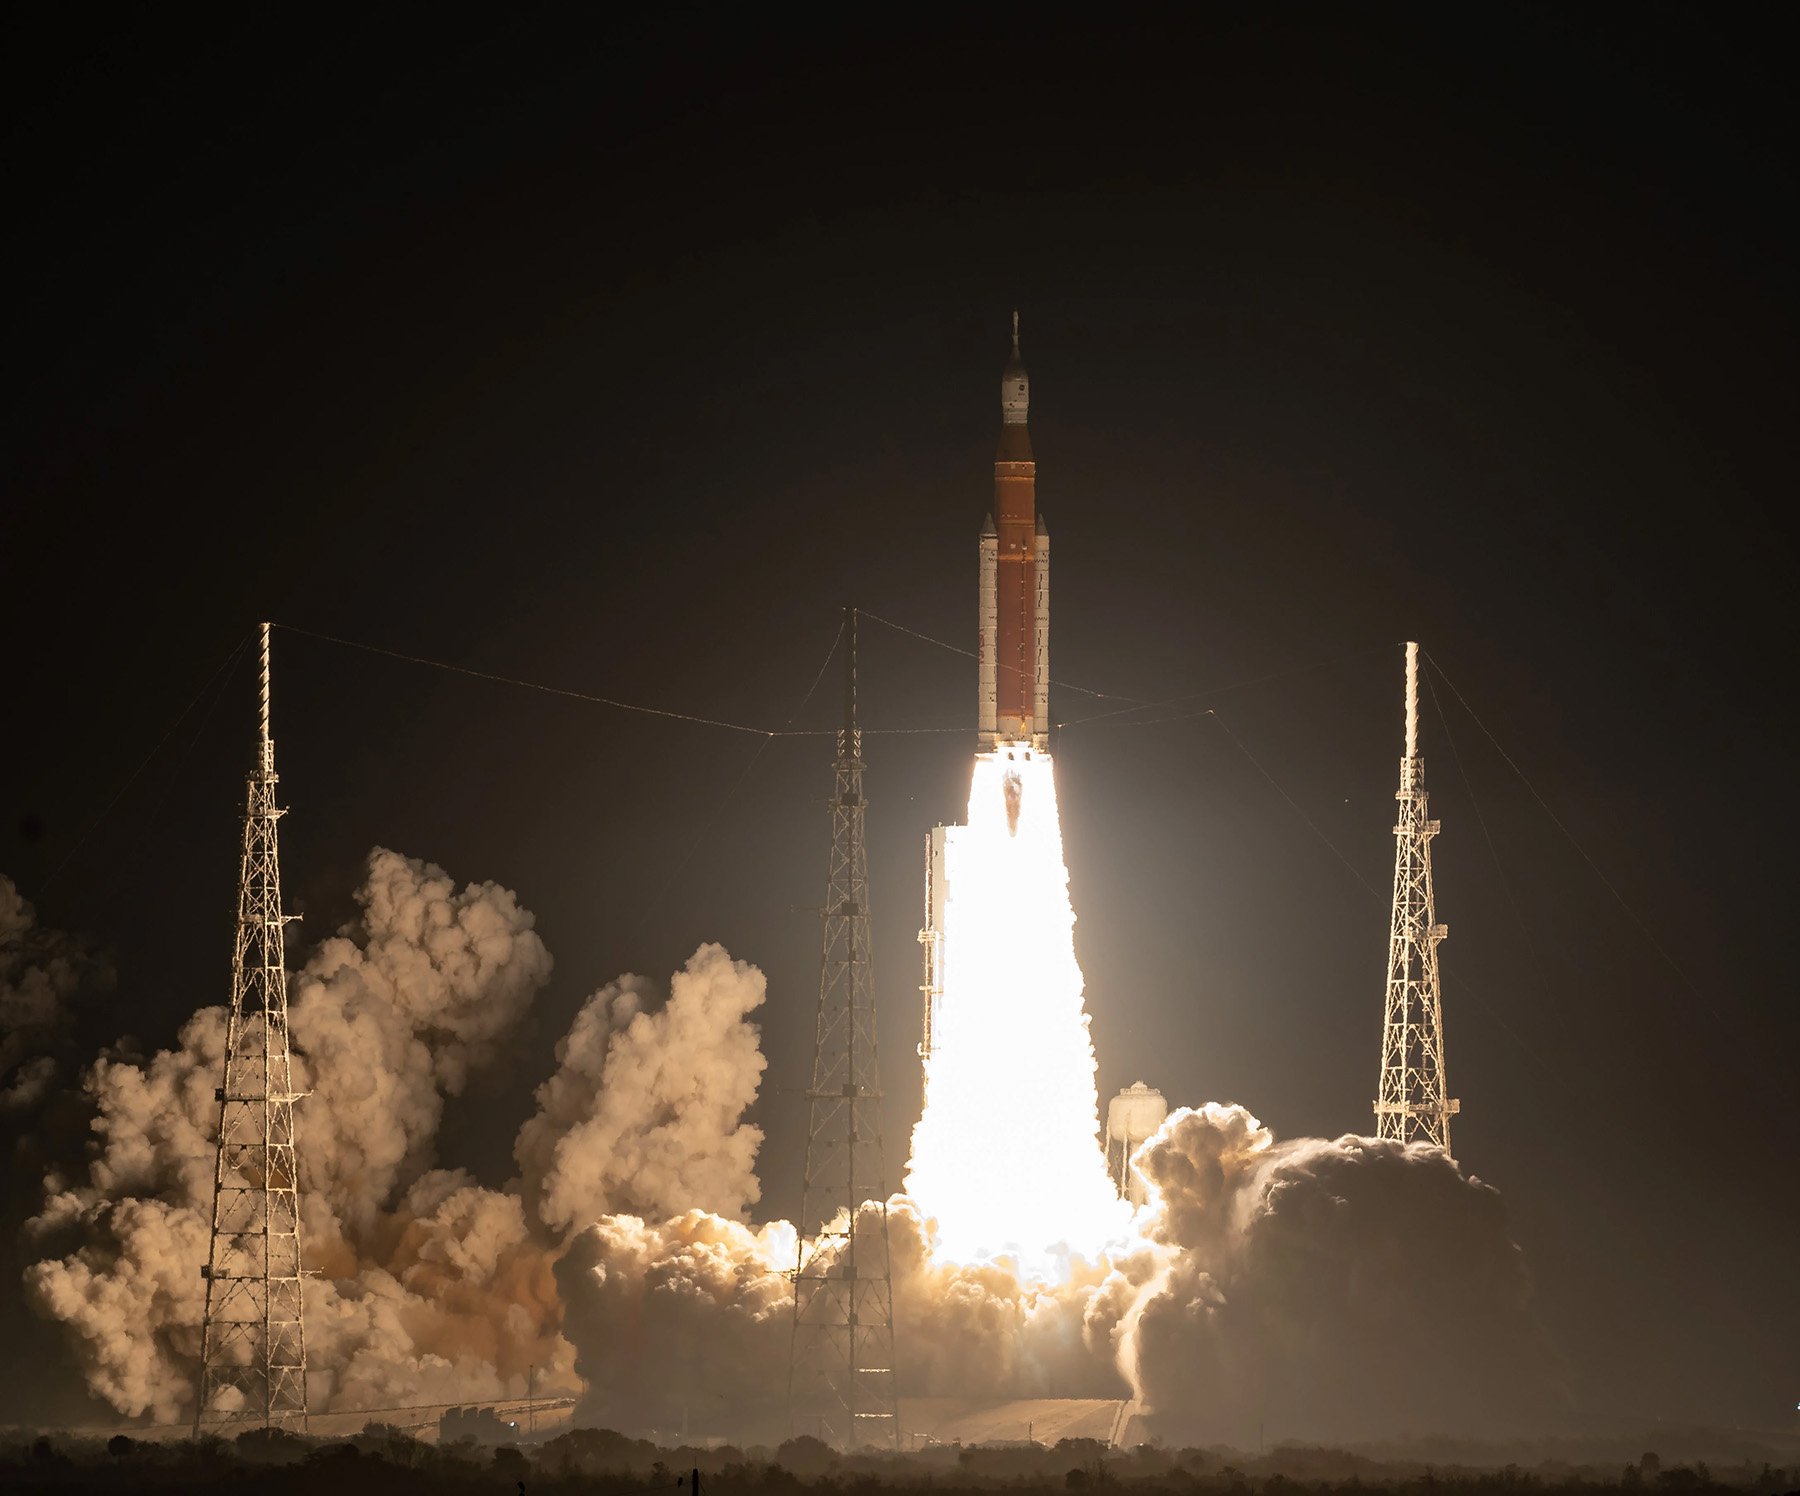 NASA’s Space Launch System rocket carrying the Orion spacecraft launches on the Artemis I flight test, Wednesday, Nov. 16, 2022, from Launch Complex 39B at NASA’s Kennedy Space Center in Florida. Image credit: Bill Ingalls